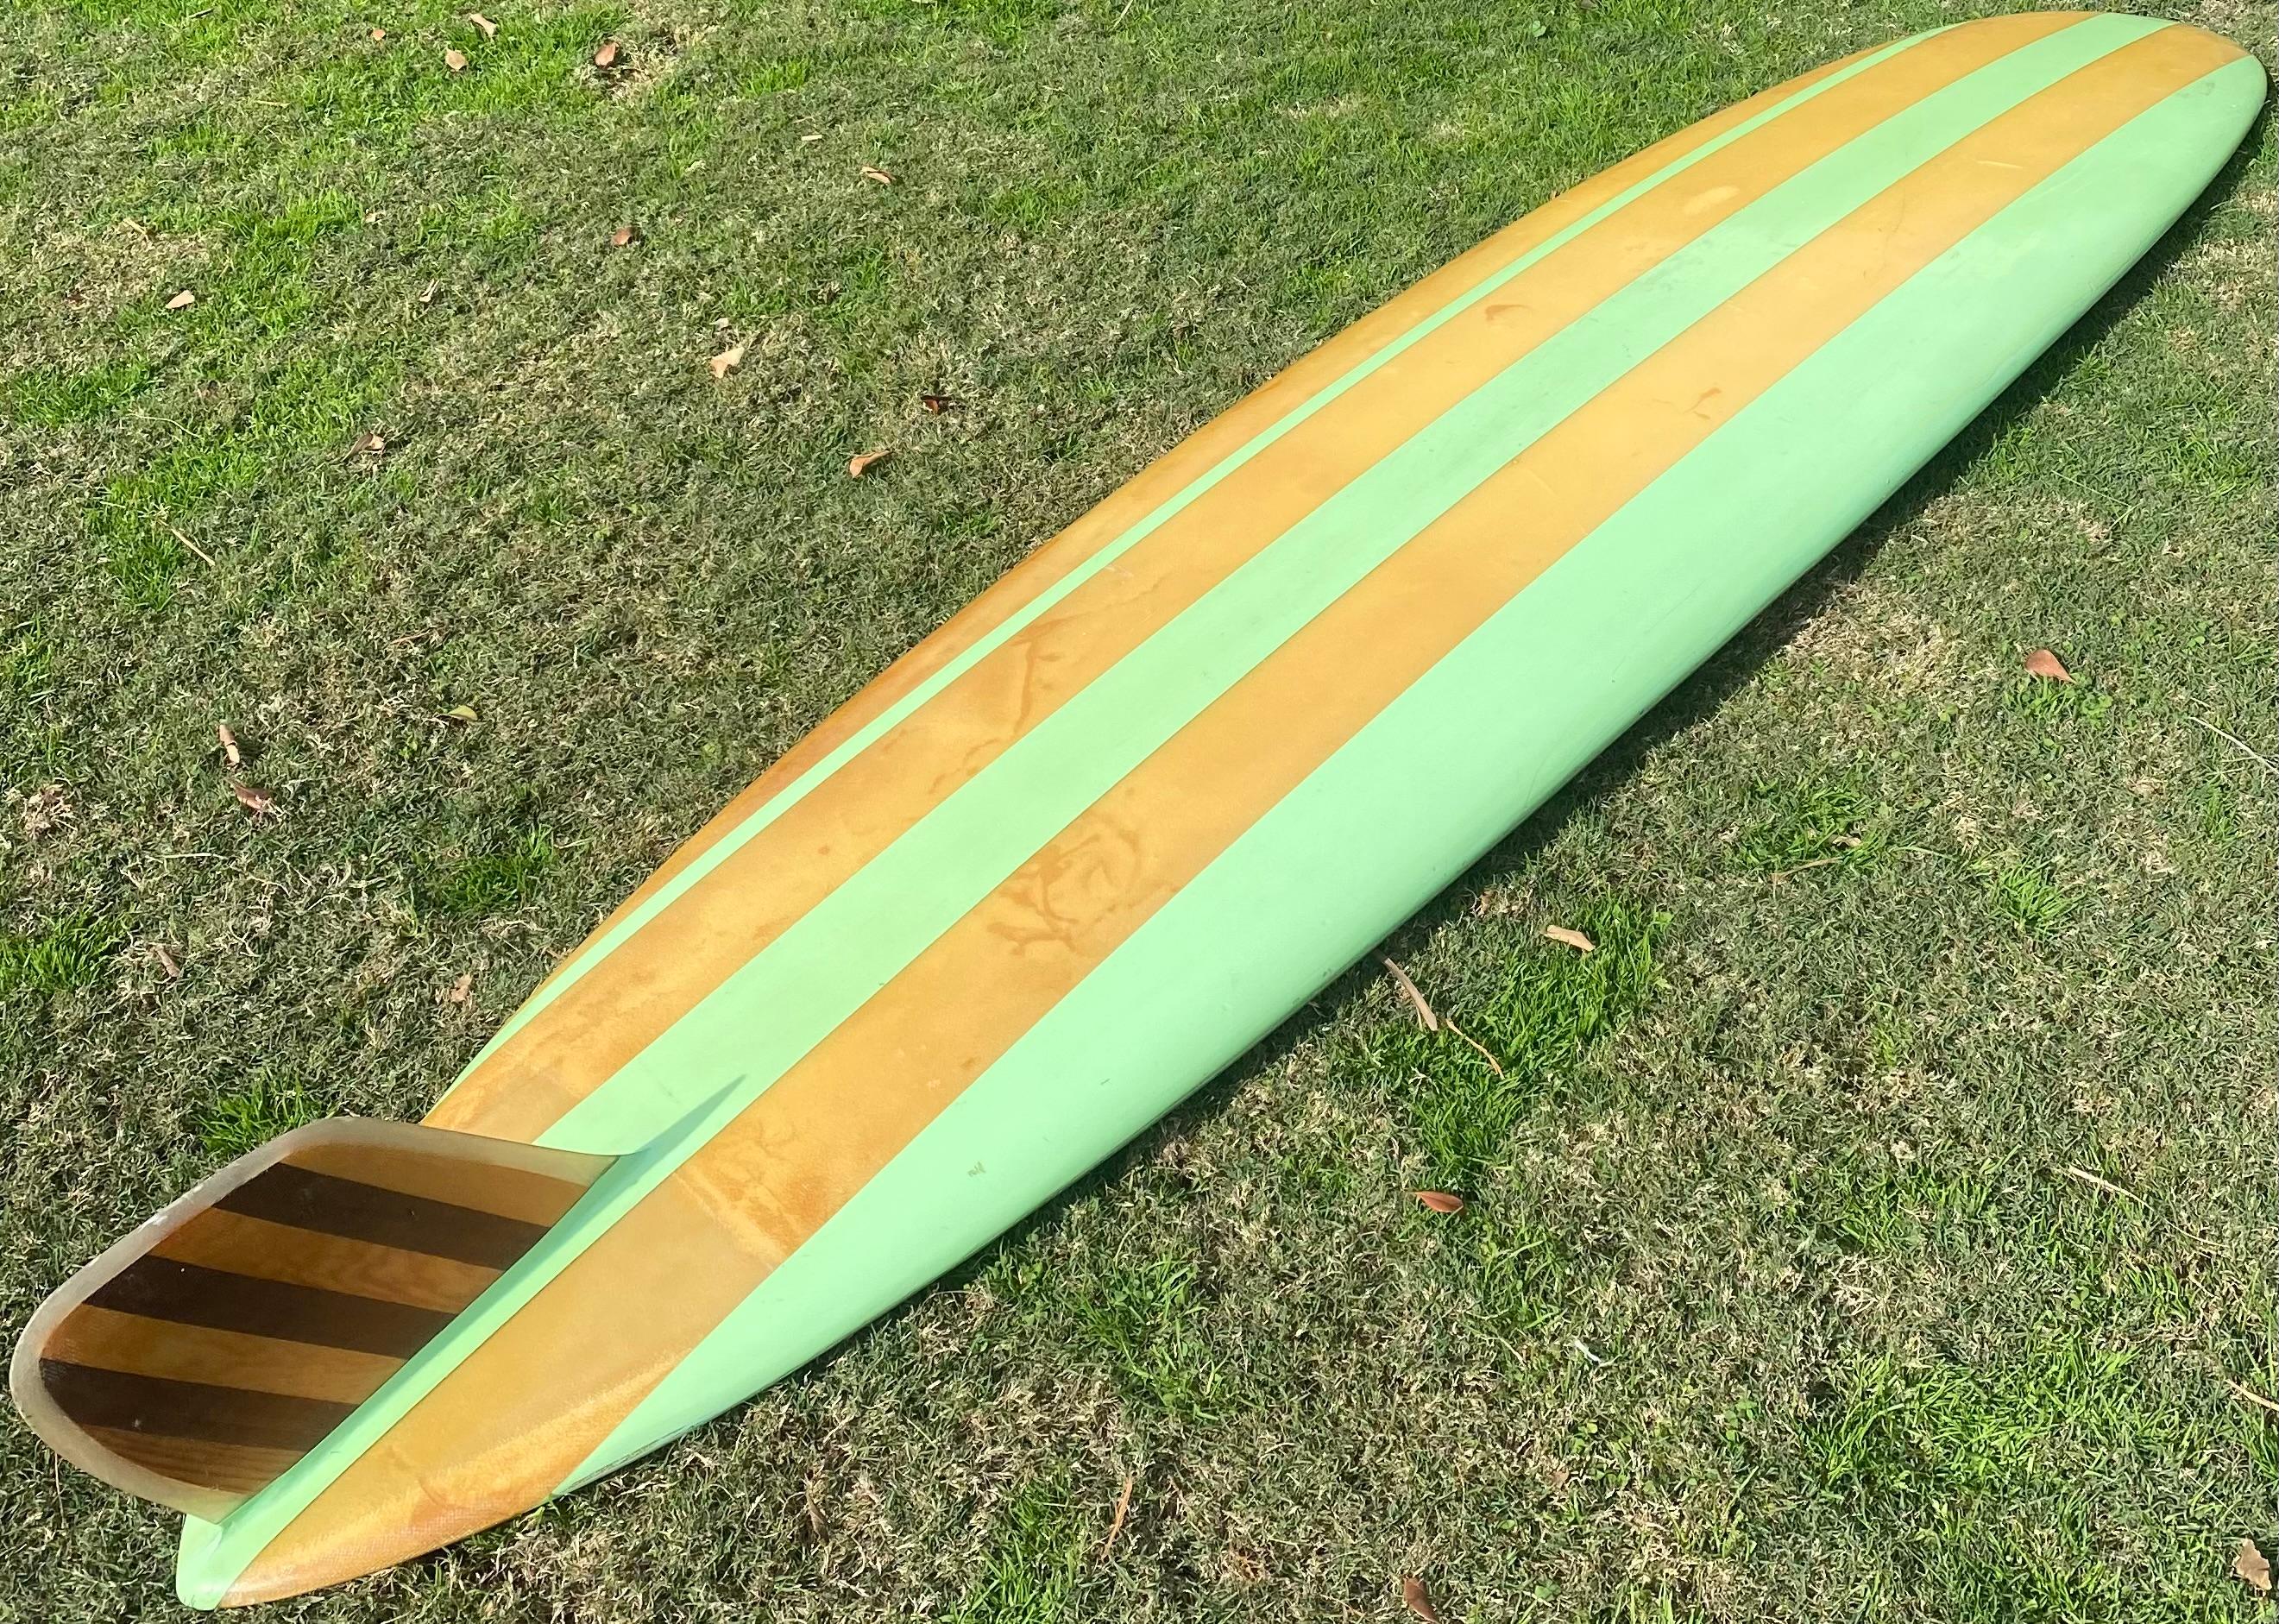 Early-1960s Velzy Surfboards pintail longboard. Features beautiful seafoam green stripes with balsa wood stringer and 7 piece wooden fin. “The Surfboard of Champions” silver-foil logo. A remarkable original example of an early 1960s longboard shaped